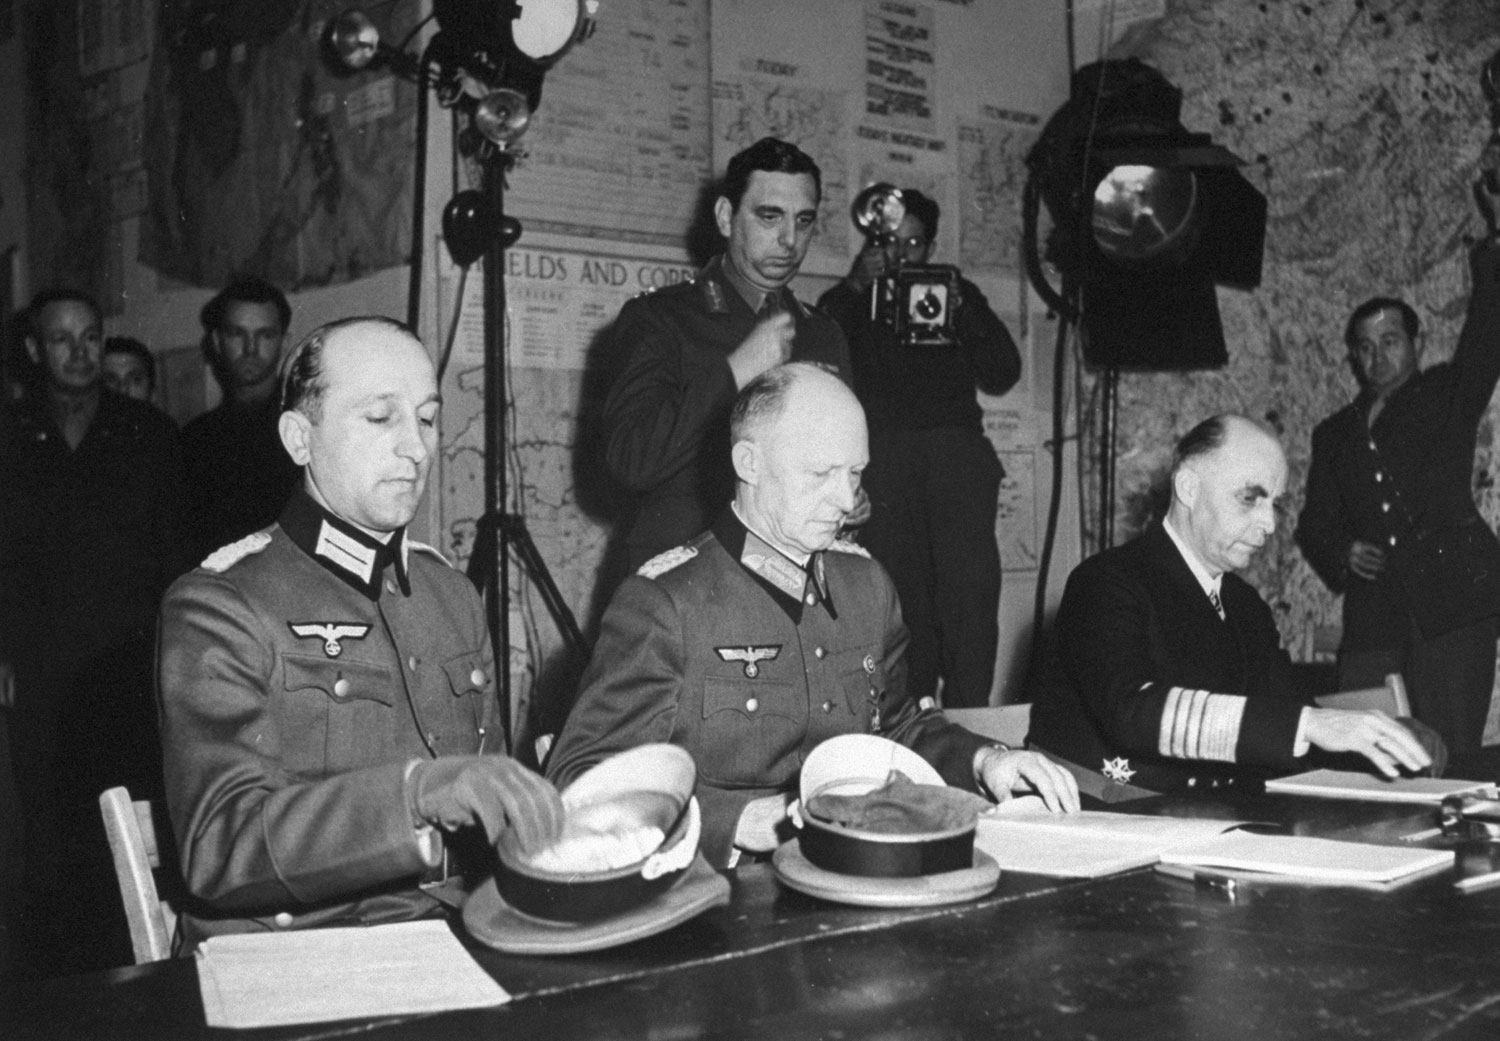 Jodl, wearing Iron Cross low on his left breast, is seated between the major and admiral. With [German Head of State Karl] Donitz's authorization, he has nothing to do but sign the surrender.